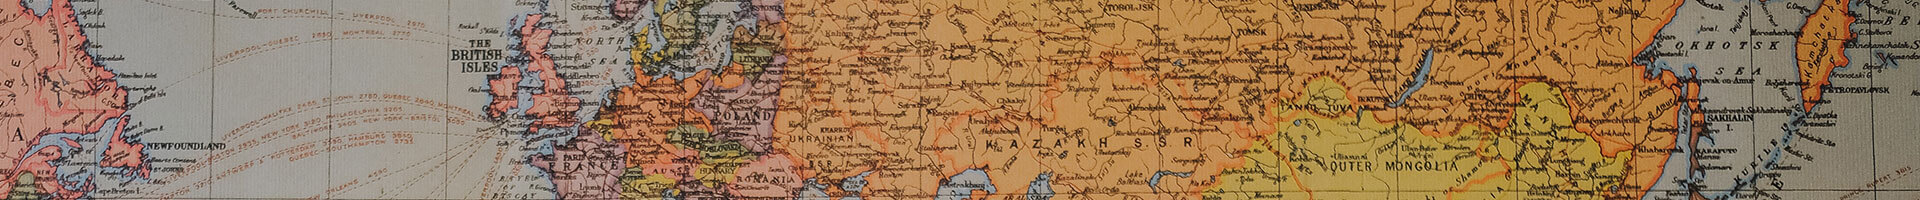 Detail of antique world map